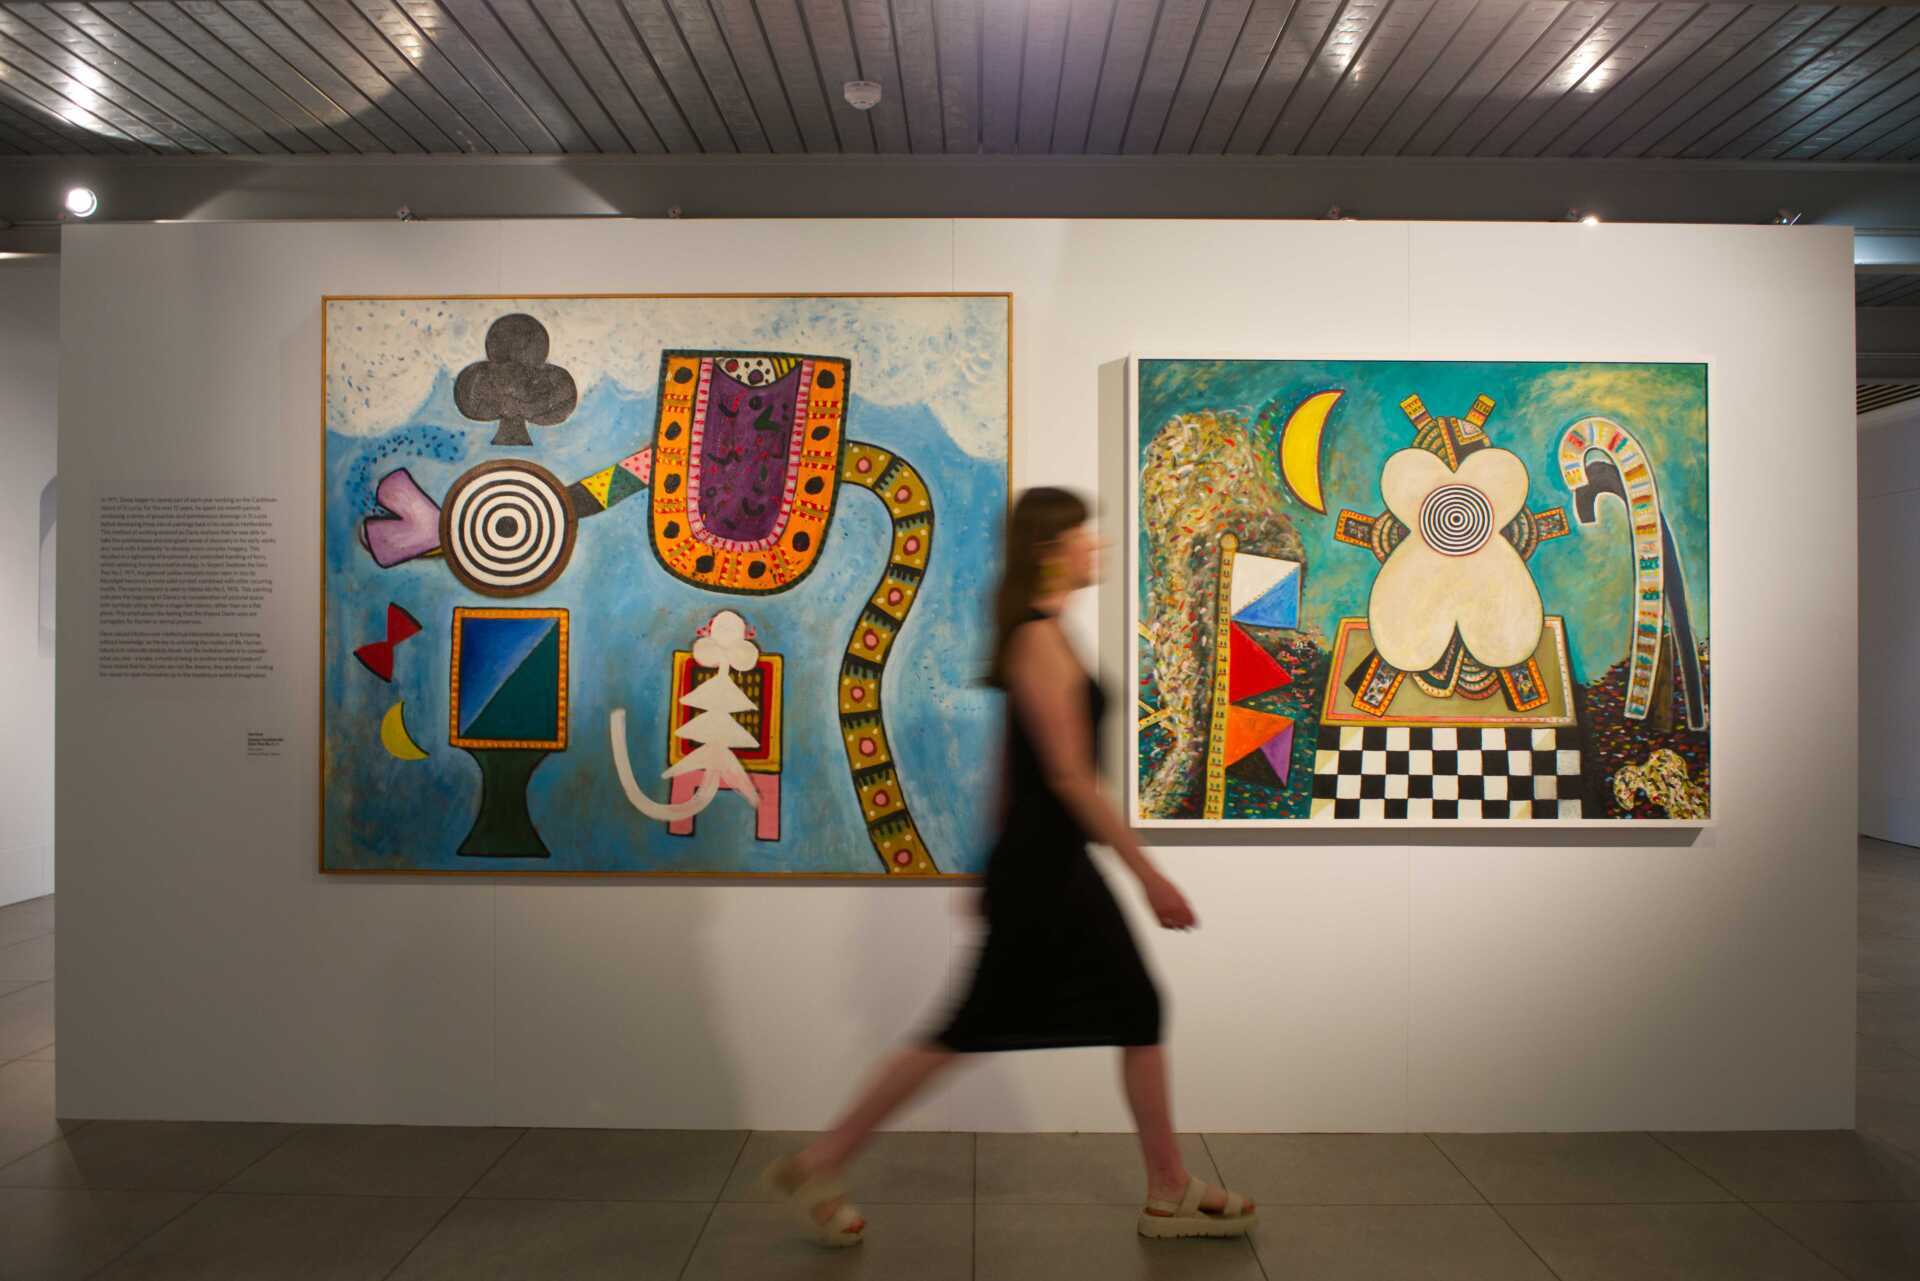 Woman walking across room in front of white wall with two Alan Davie paintings hanging